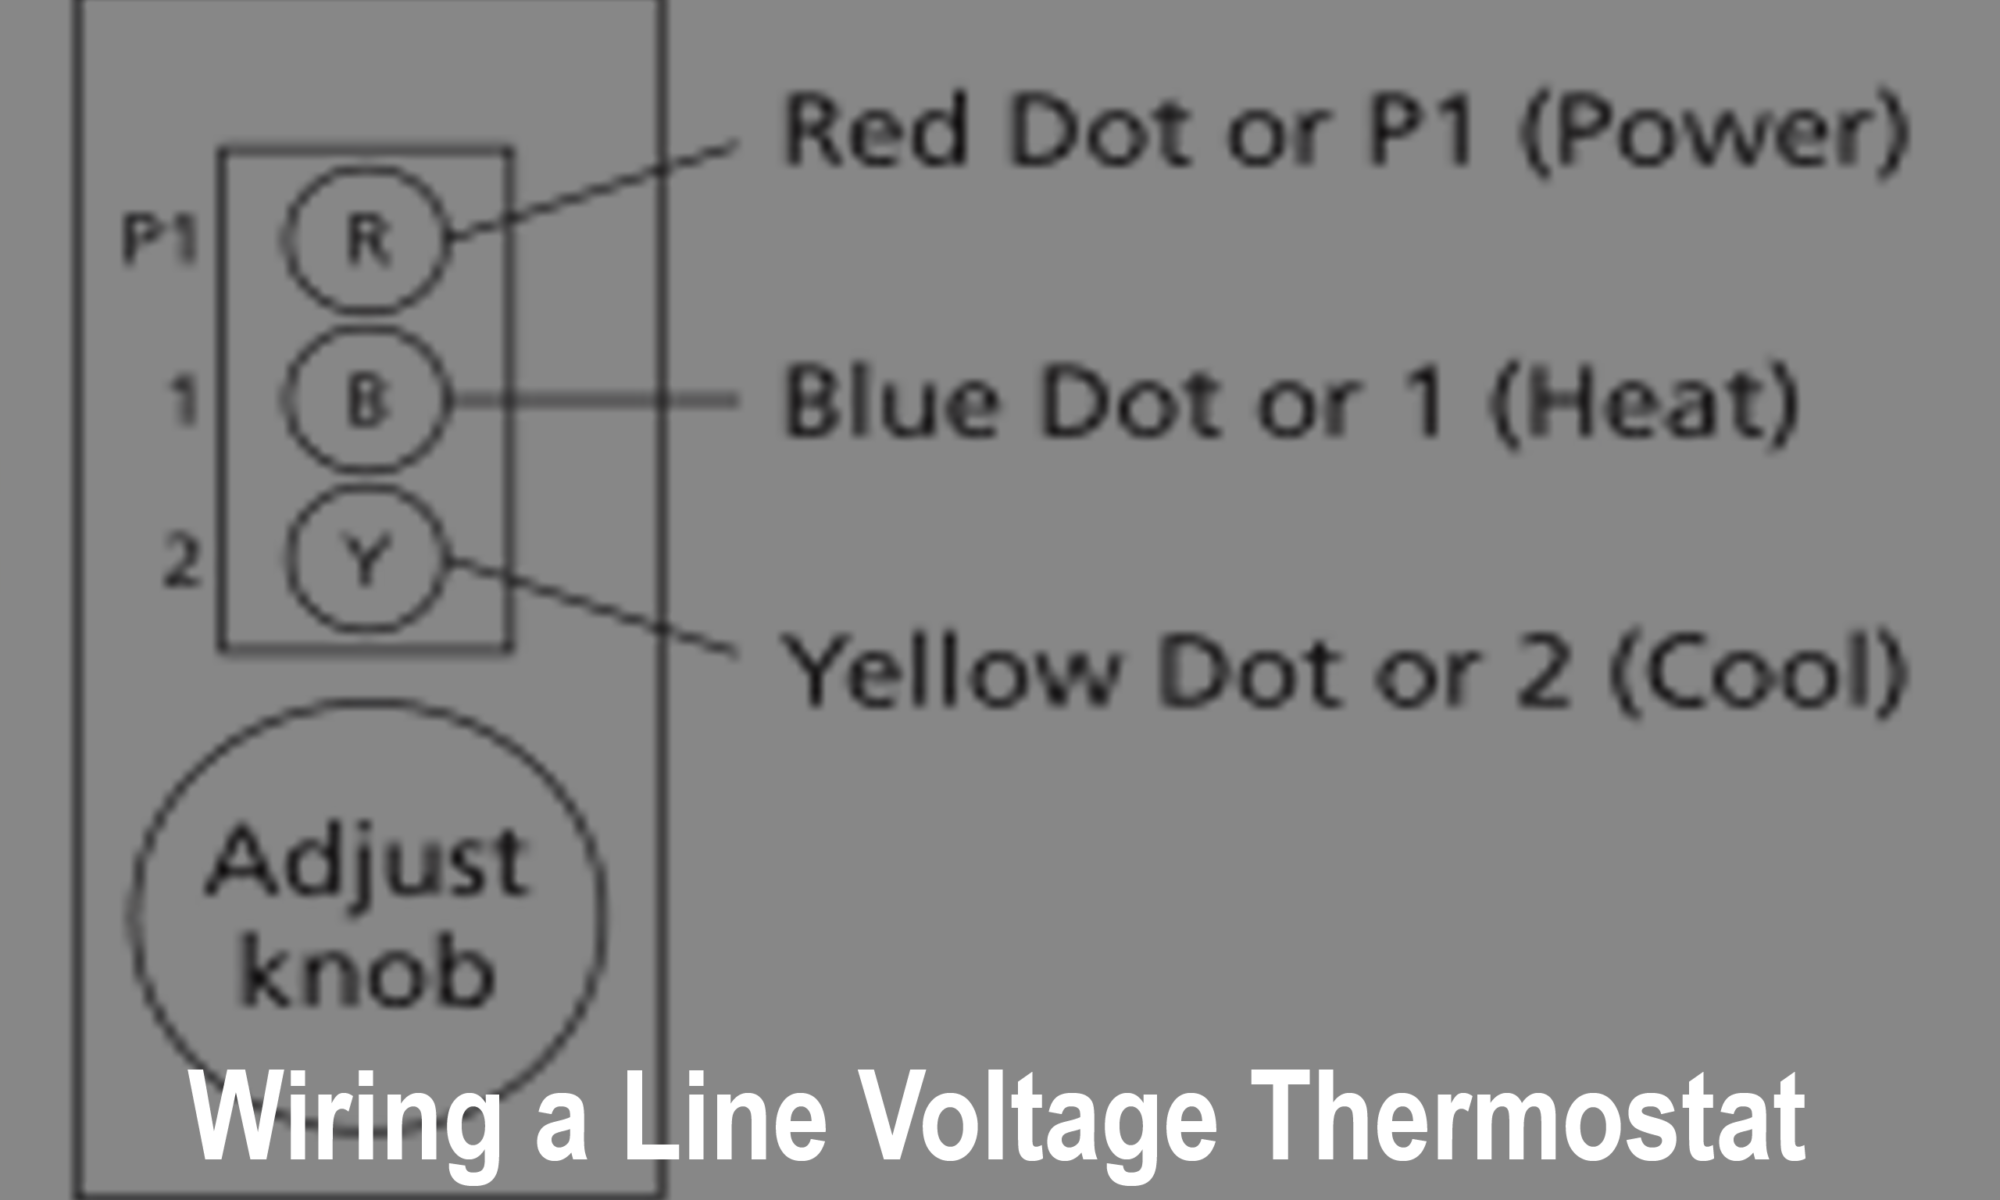 Wiring a Line Voltage Thermostat